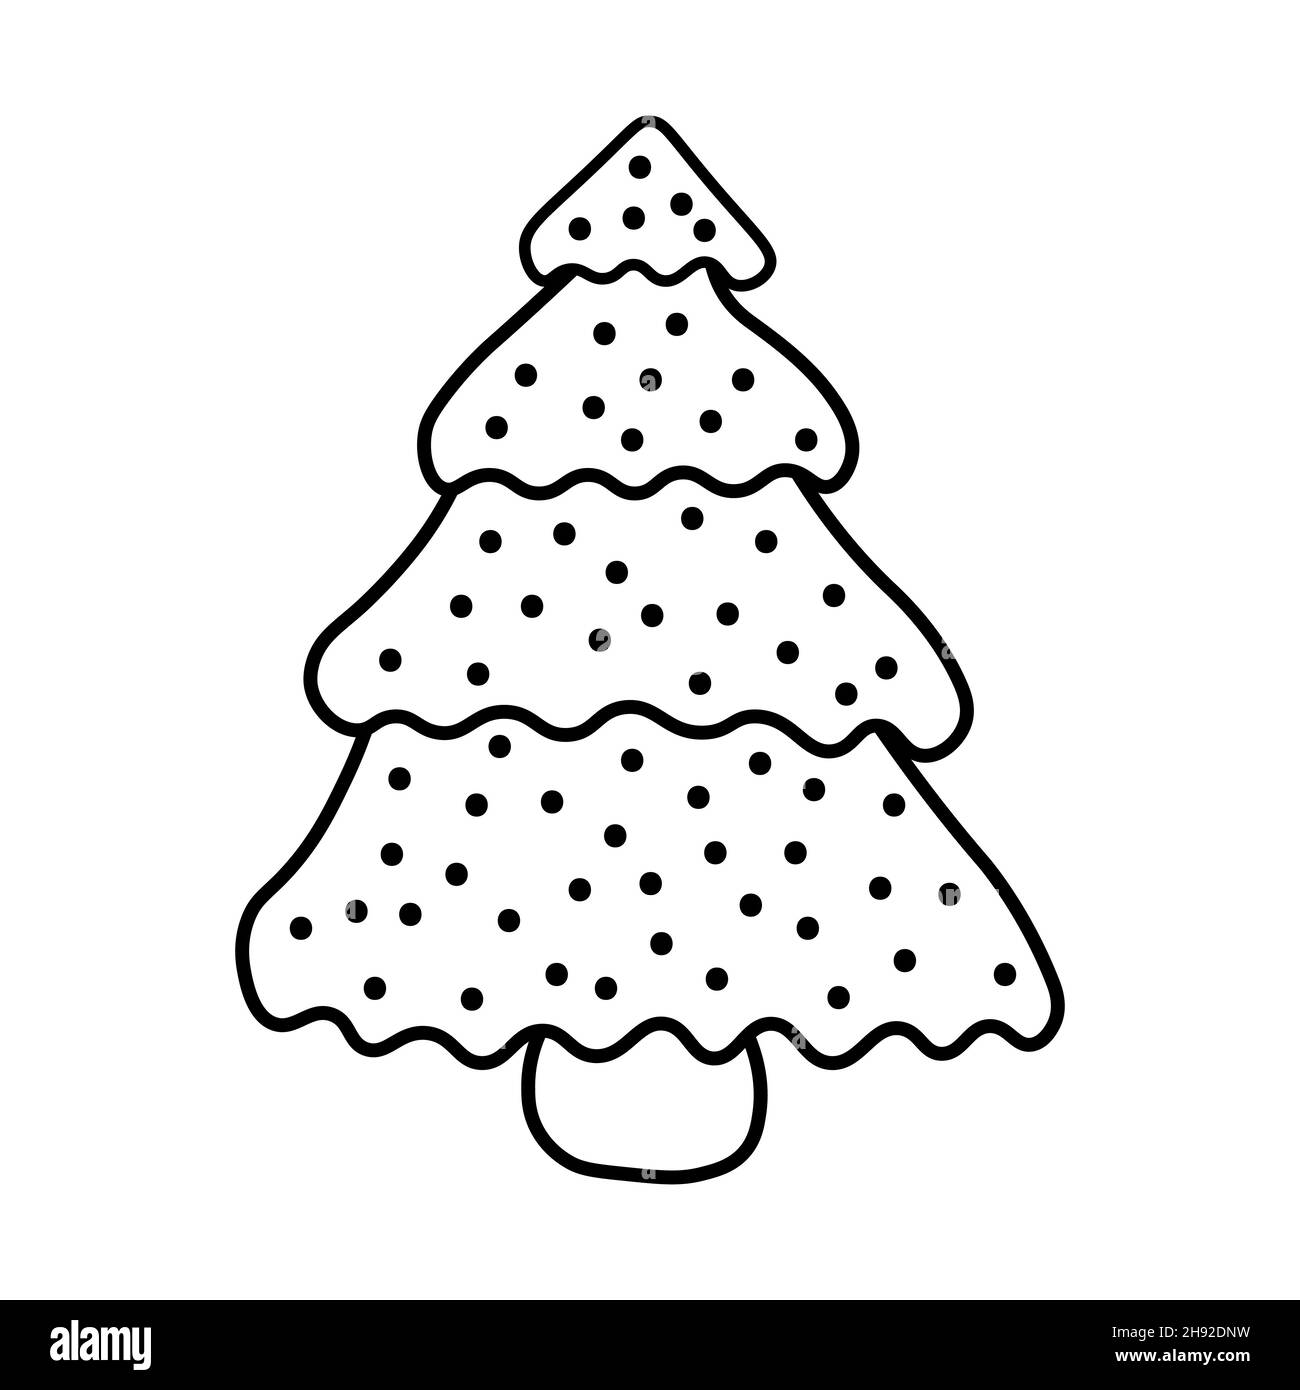 Vector hand drawn christmas tree. Illustration spruce isolated on white background. Doodle style. Hand drawn Christmas symbol. Stock Vector